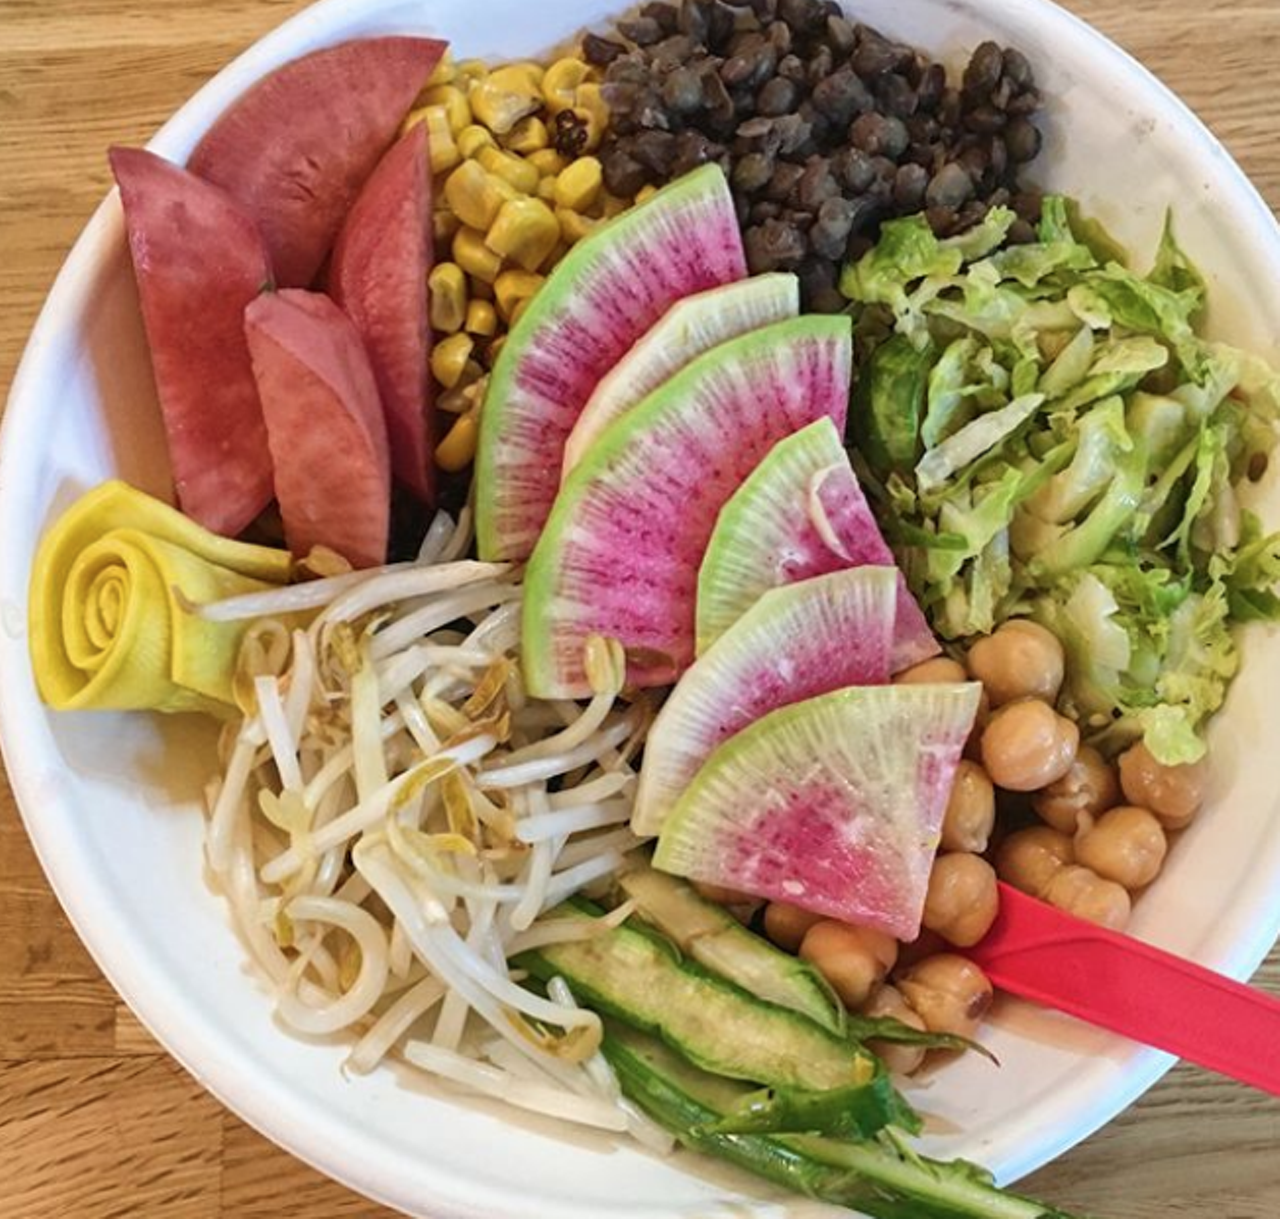 The Good Kind
312 Pearl Parkway, Building 6, (210) 455-2834, eatgoodkind.com
Chef and mother of one, Tim McDiarmid is making San Antonio eat its veggies and lean proteins at The Good Kind and with her catering company TimTheGirl.
Photo via Instagram / foodiesoftexas